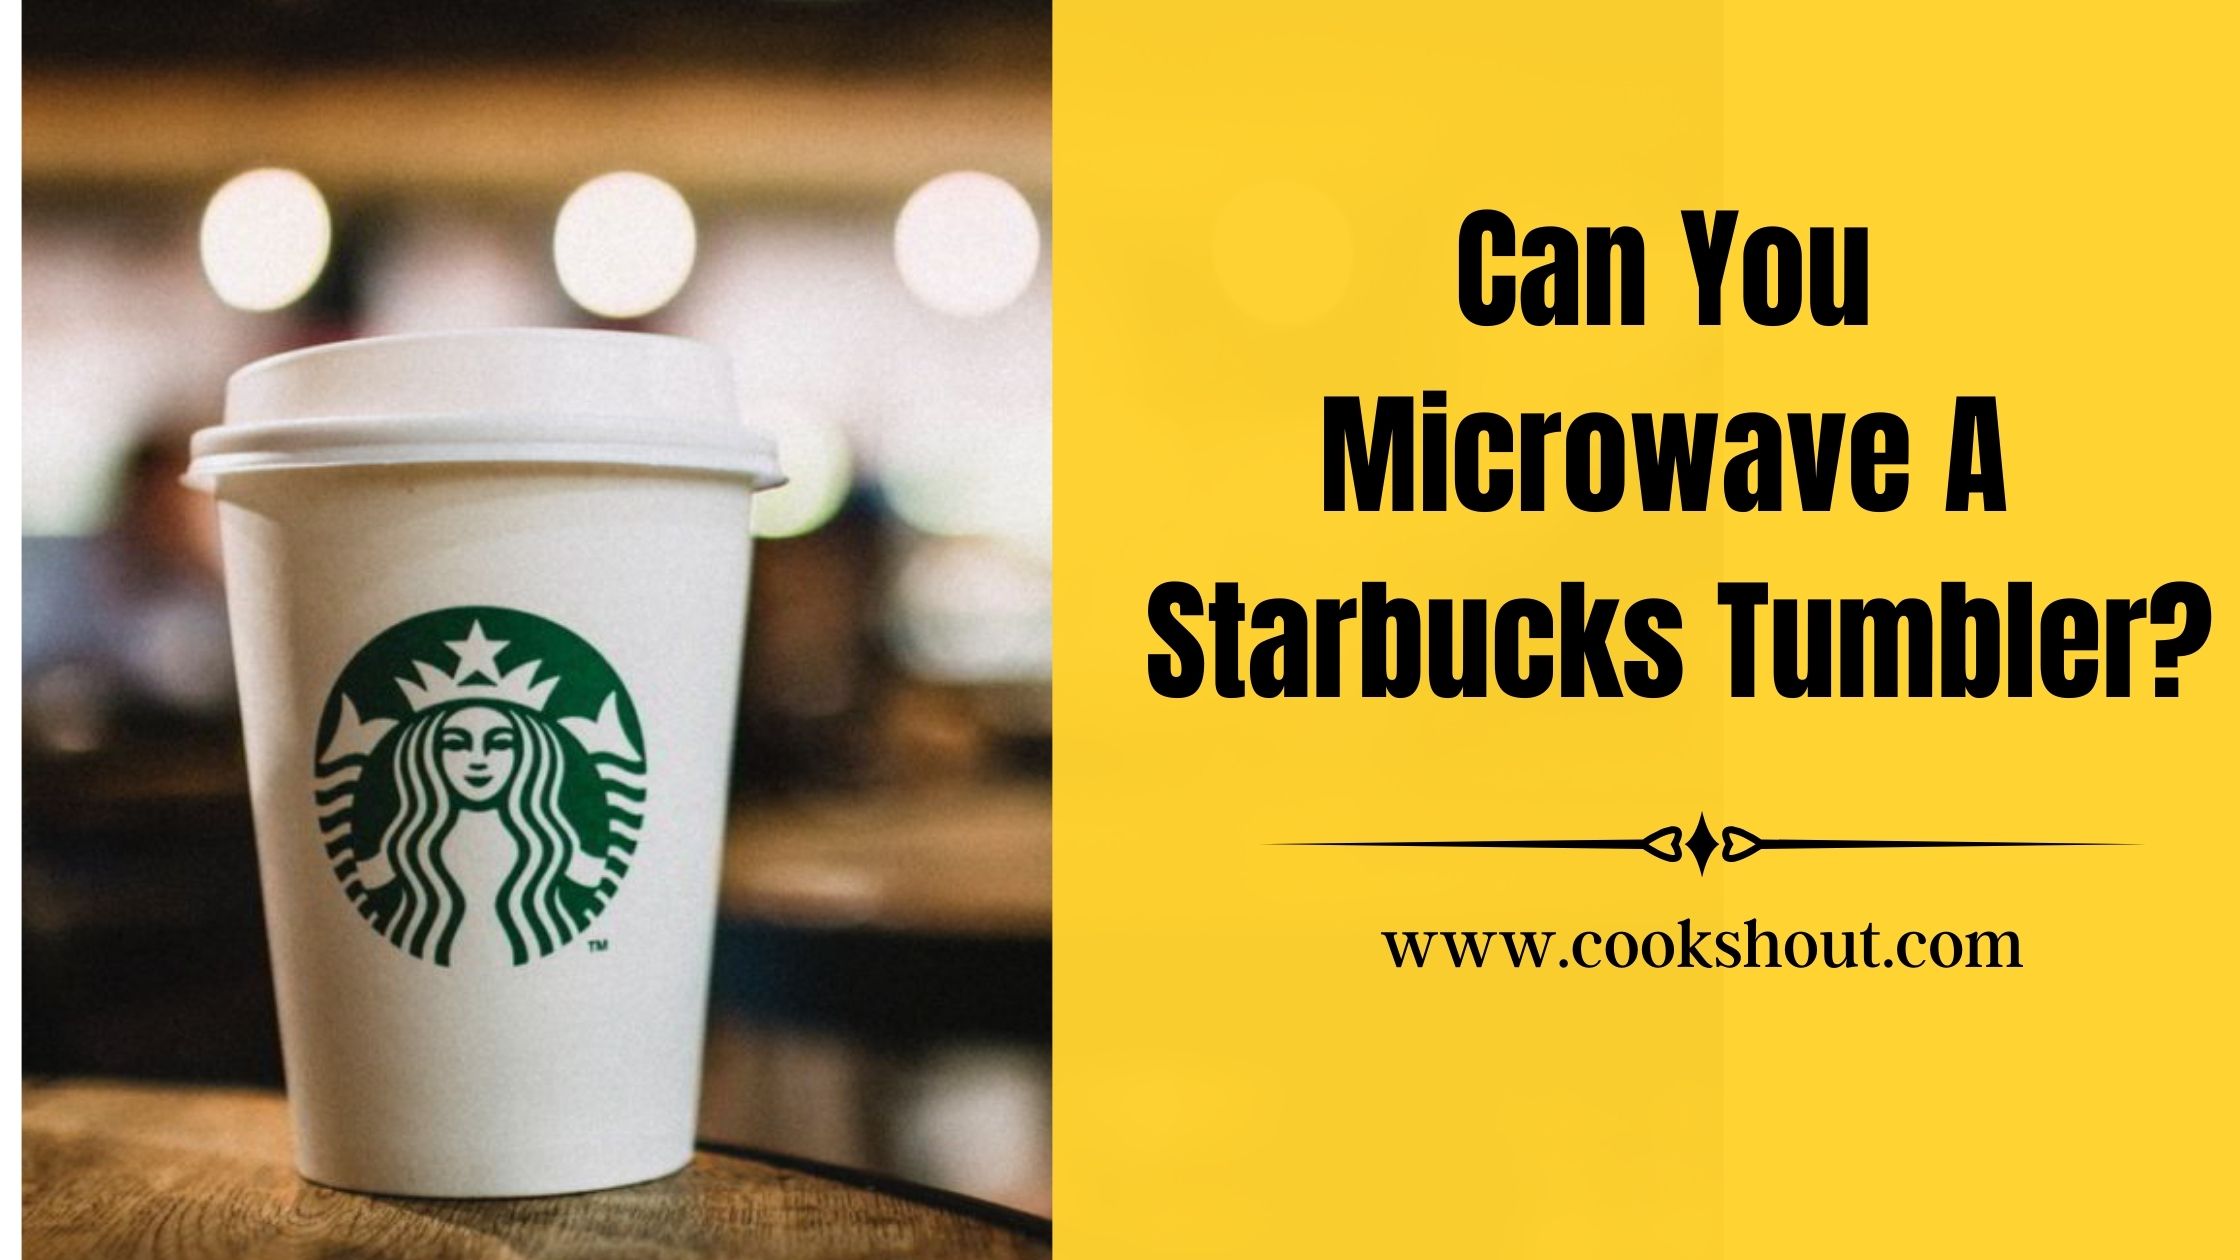 Can You Microwave A Starbucks Tumbler